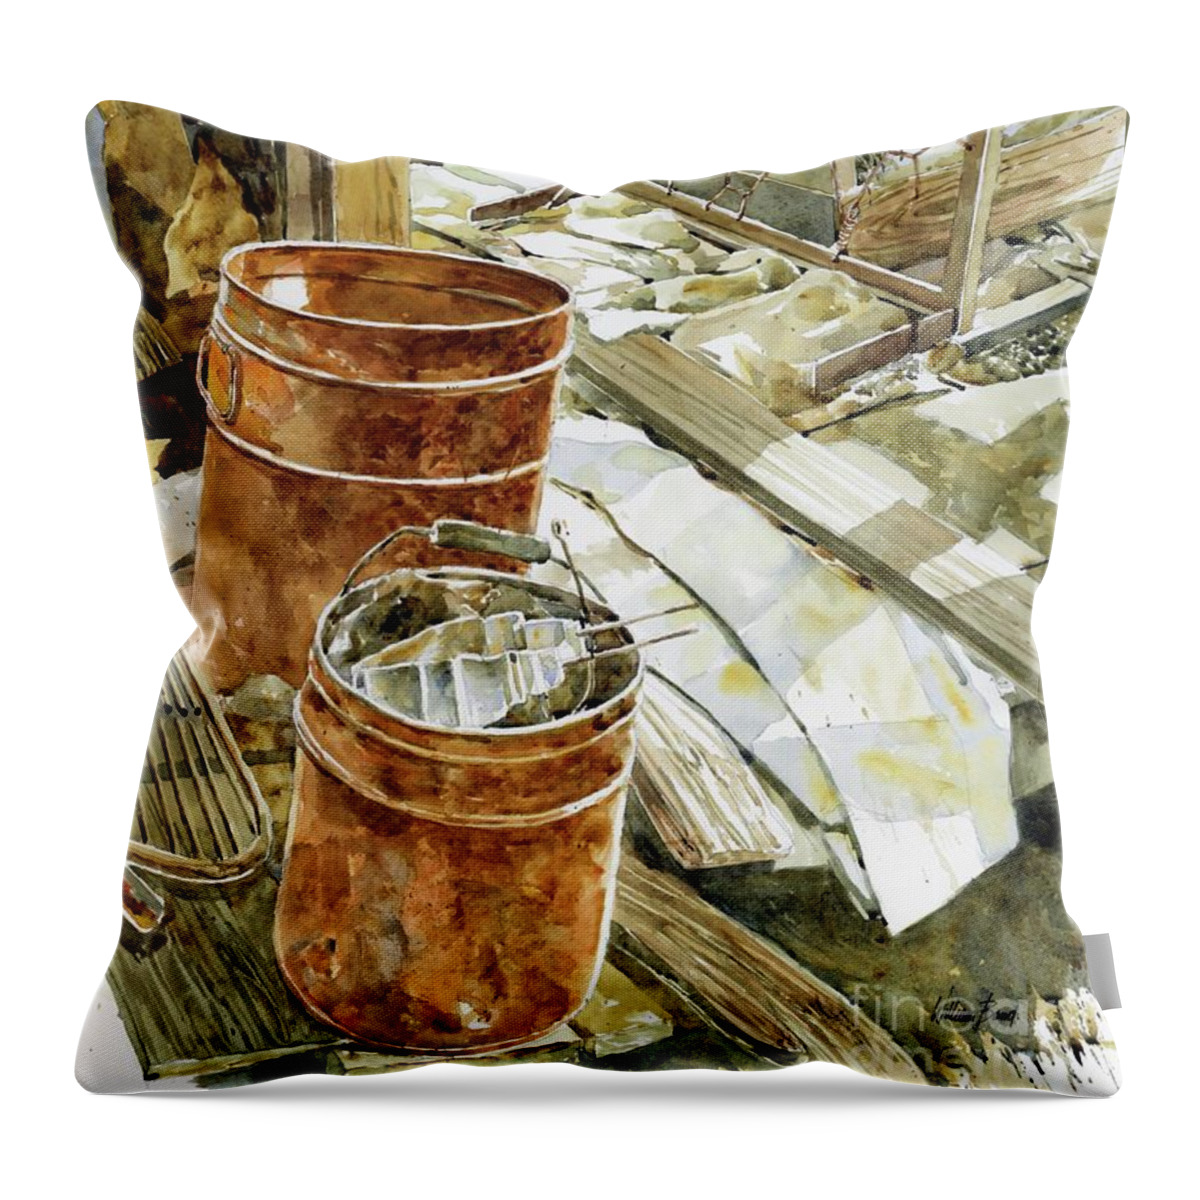 Watercolour Throw Pillow featuring the painting Rusty Beauties by William Band